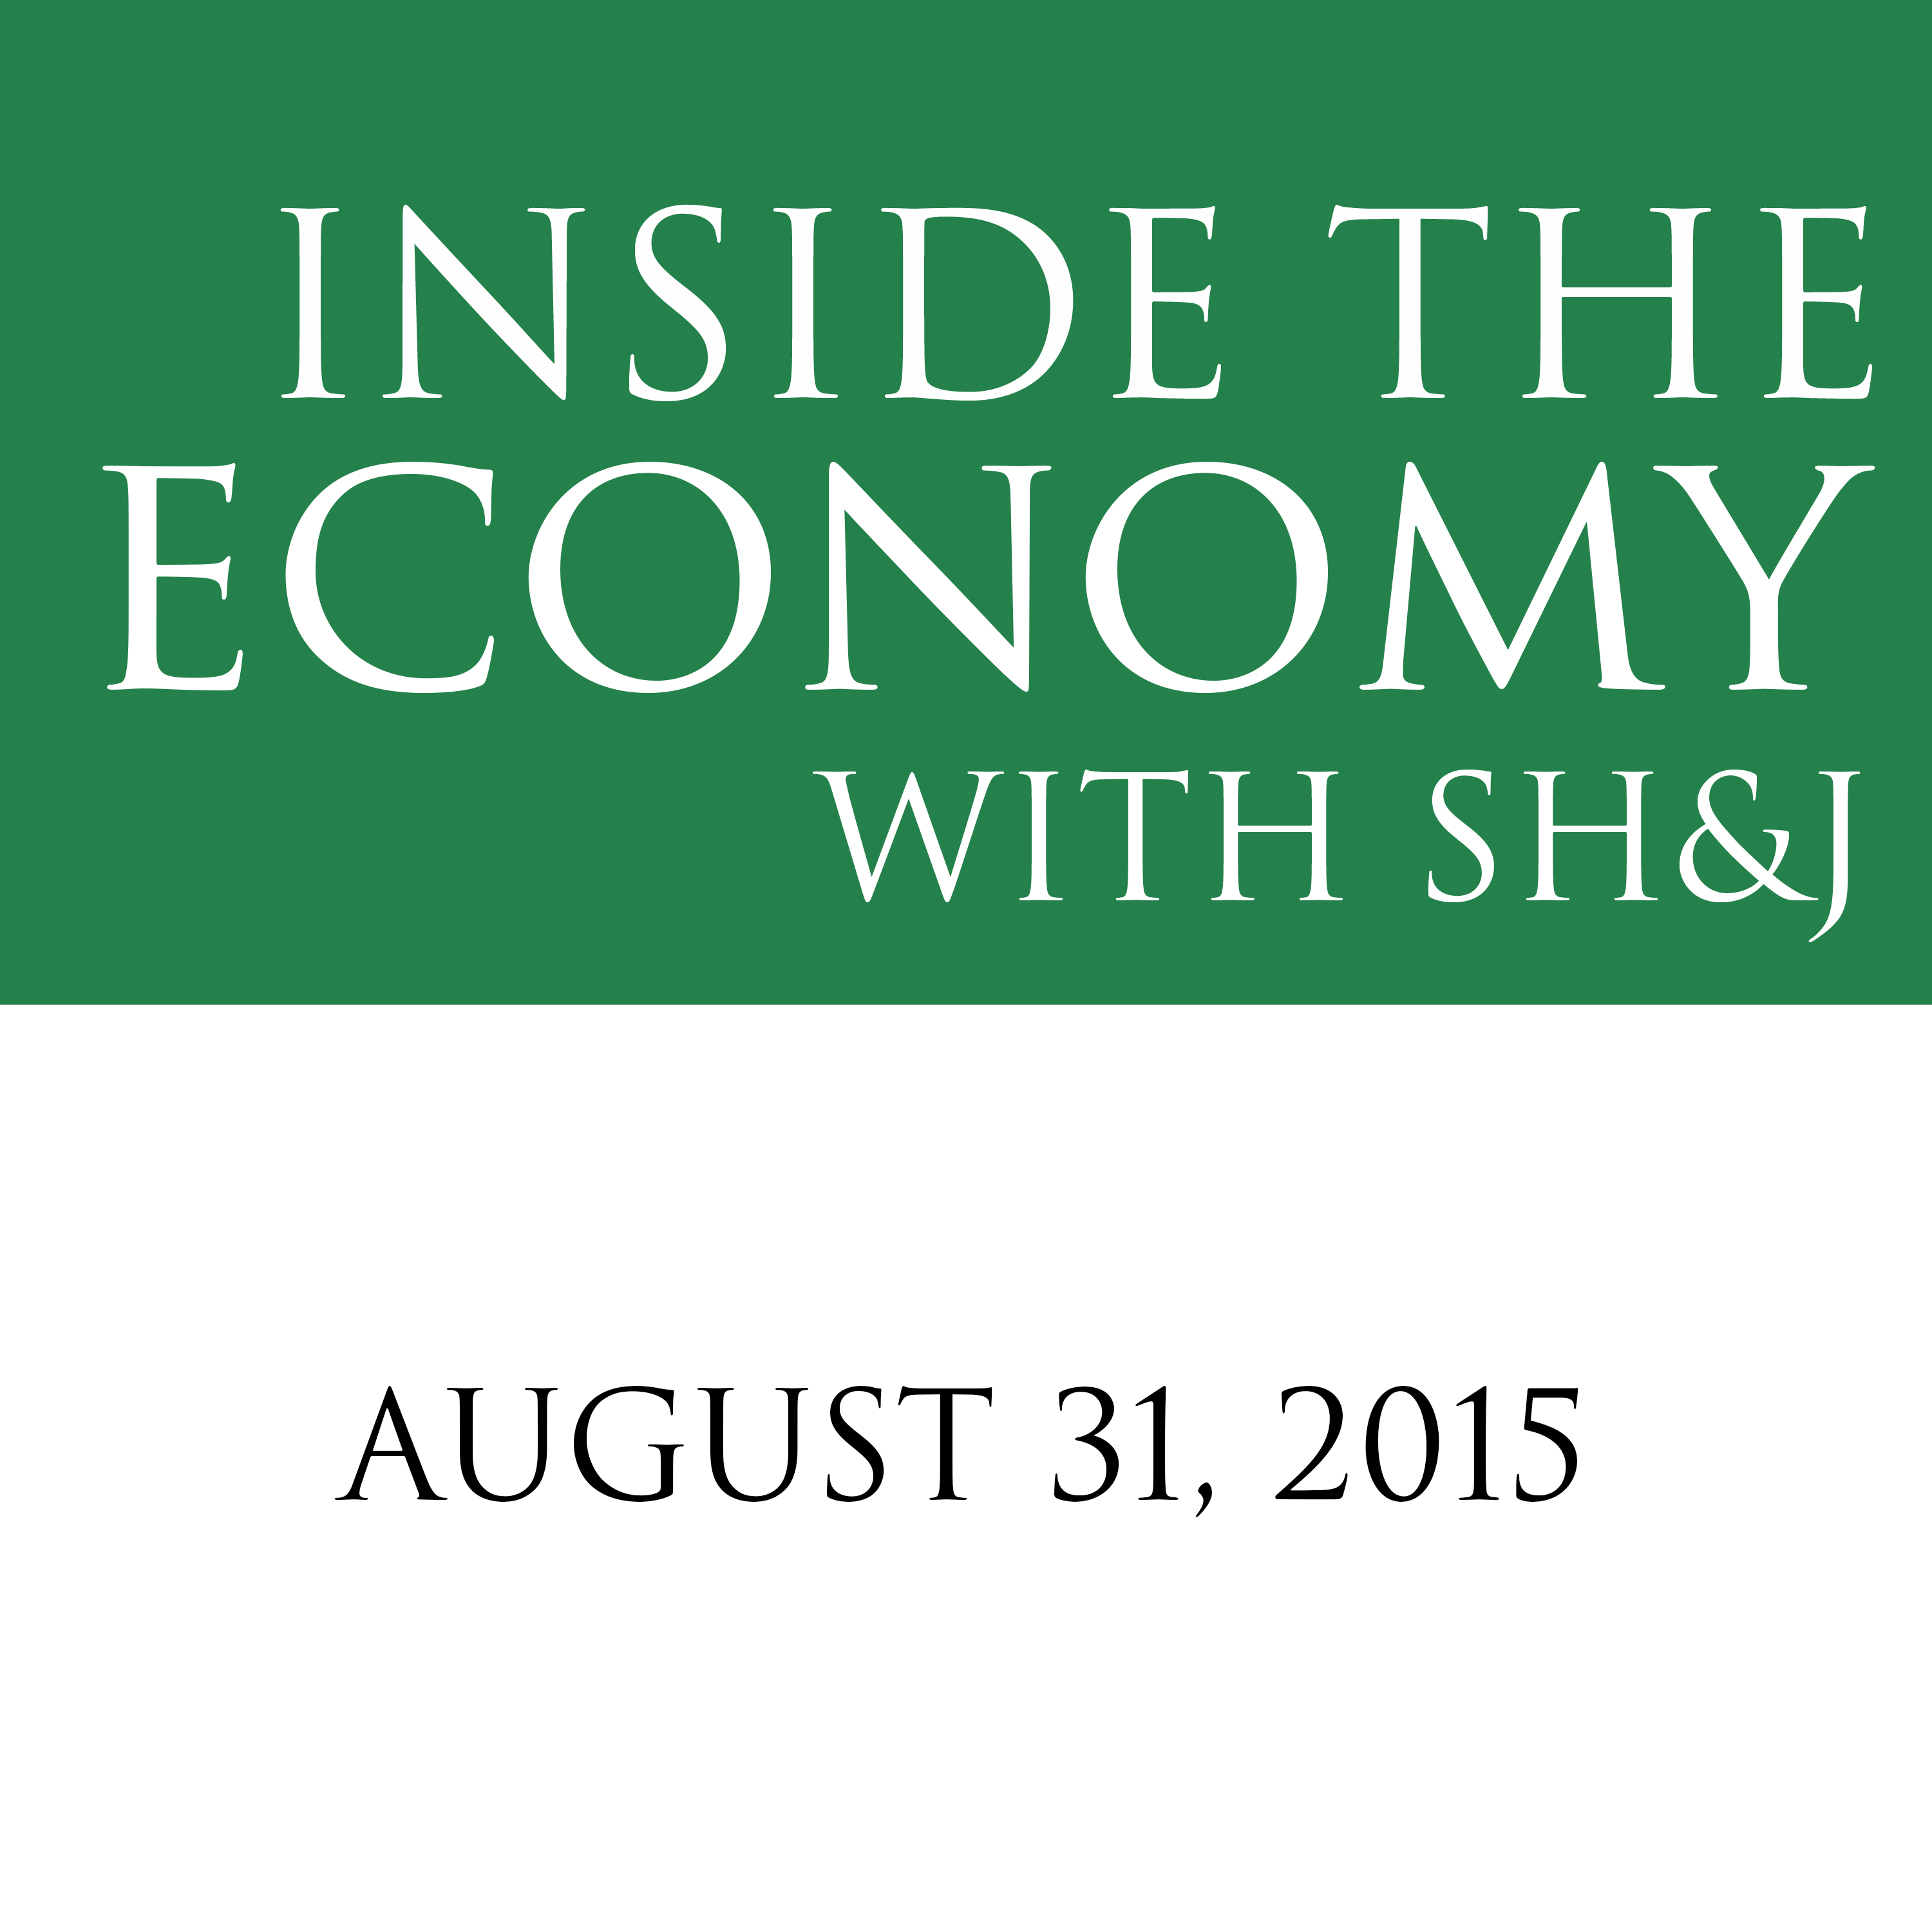 August 31, 2015 -- Inside the Economy with SH&J